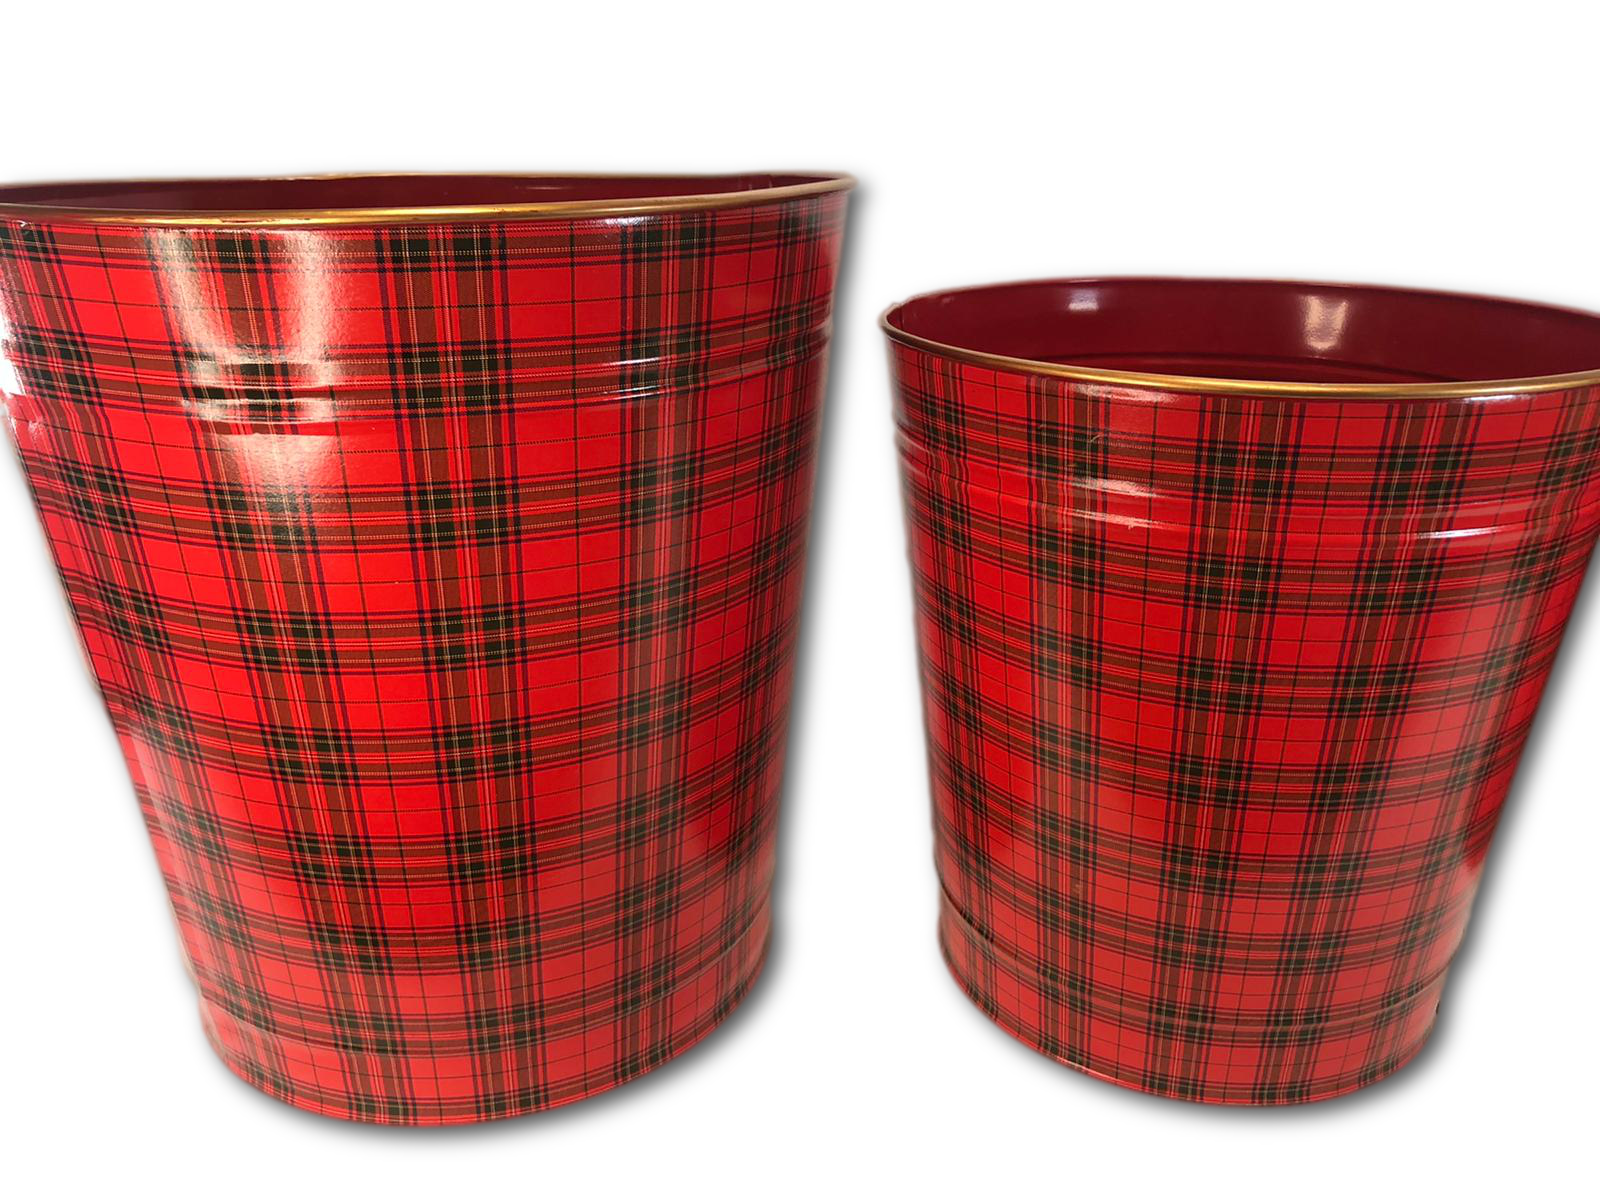 Set of 3 Plaid Round Metal Buckets by Valerie